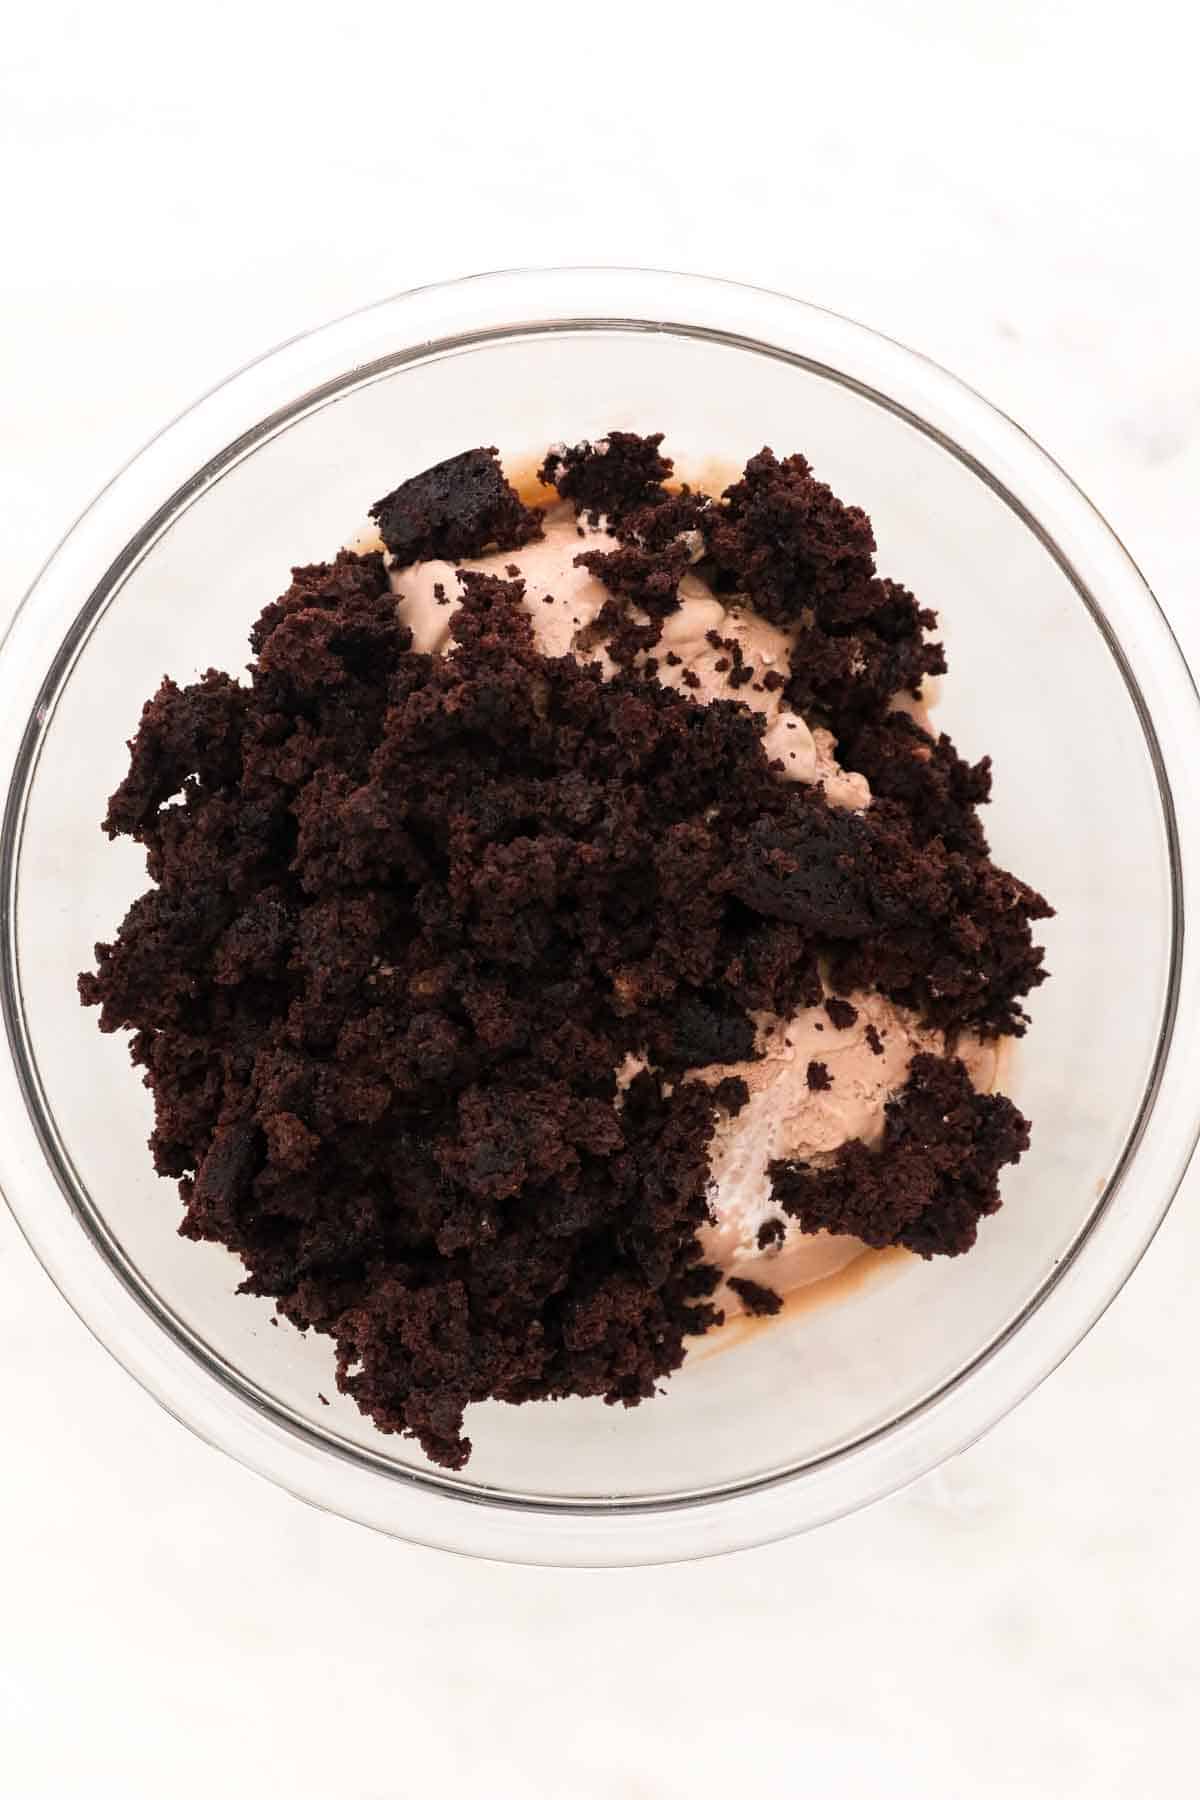 a glass mixing bowl with softened ice cream and chocolate cake crumbs